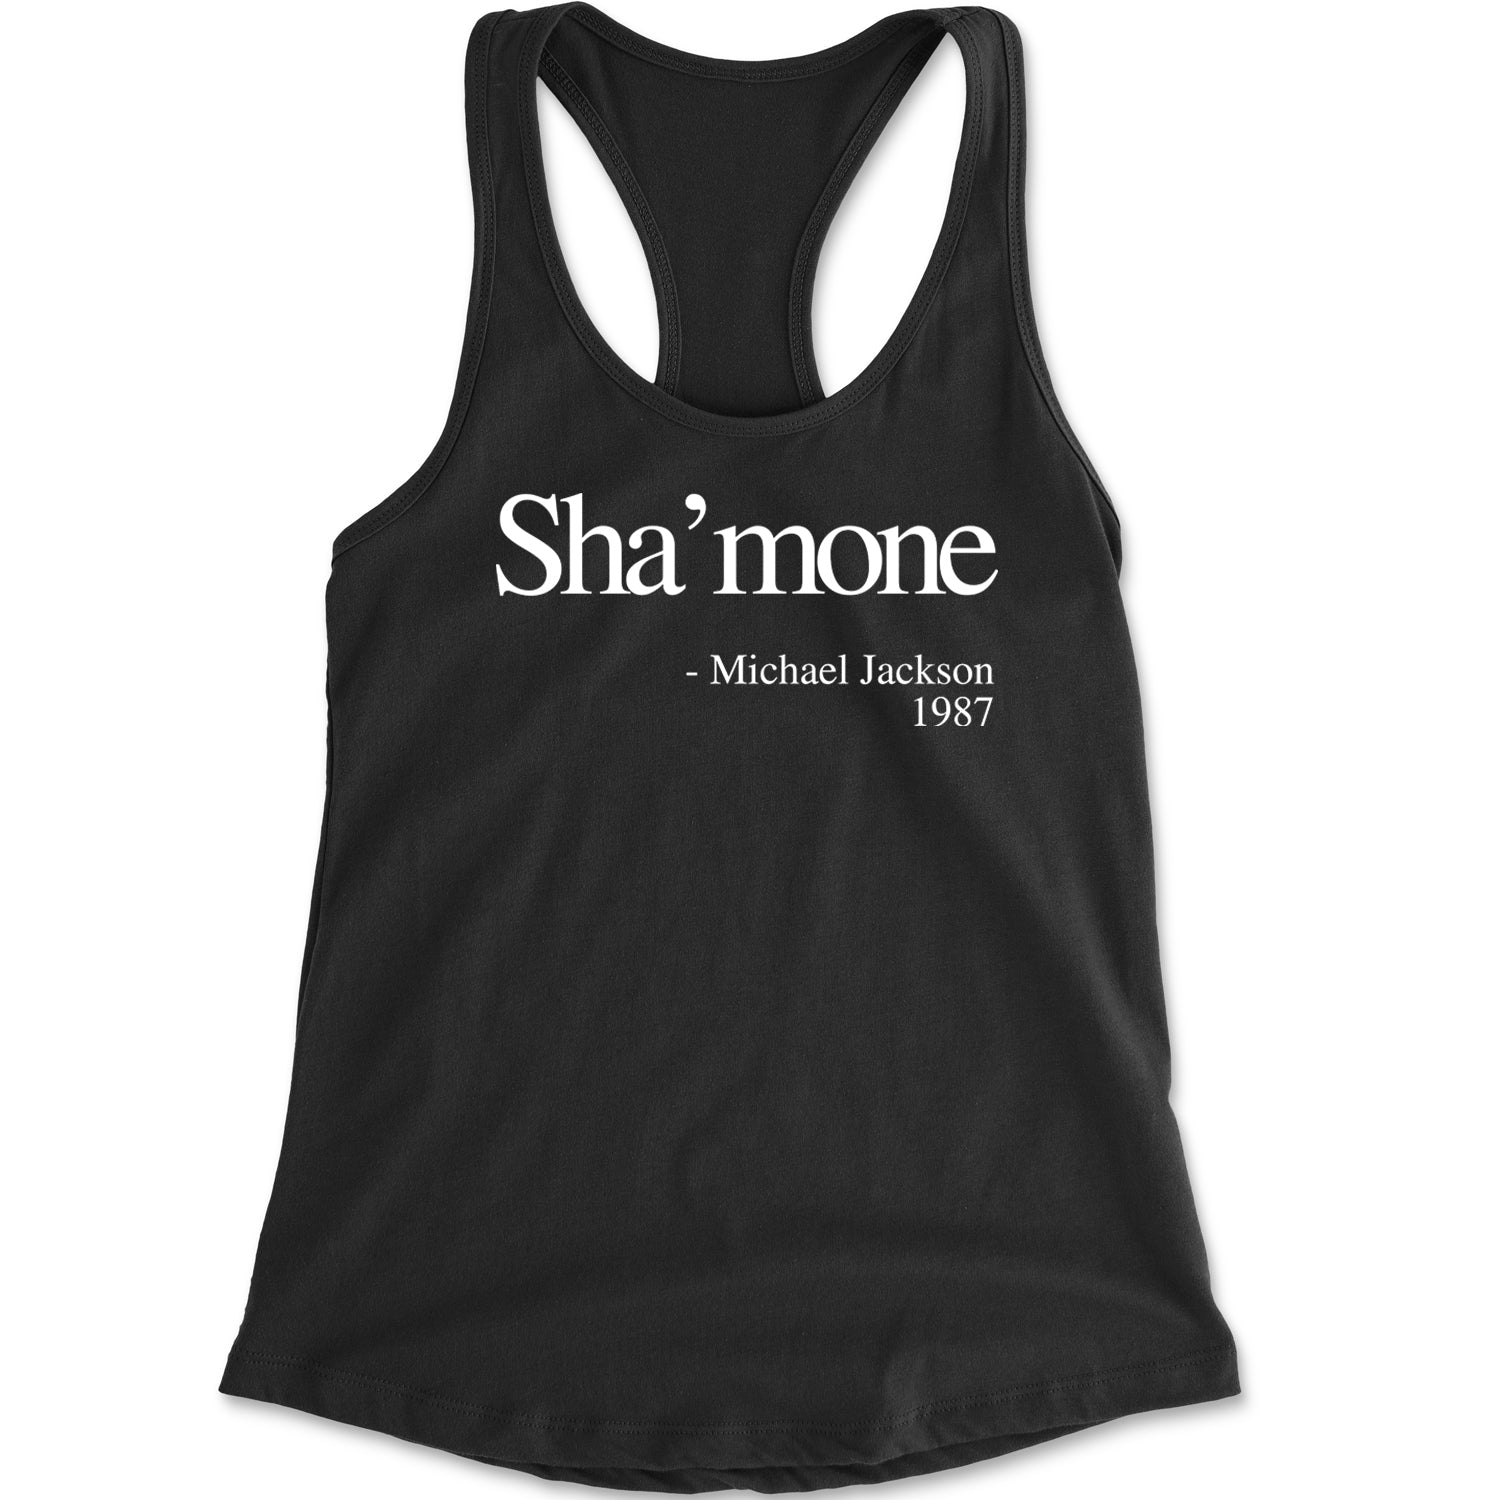 Sha'mone Quote King Of Pop Racerback Tank Top for Women